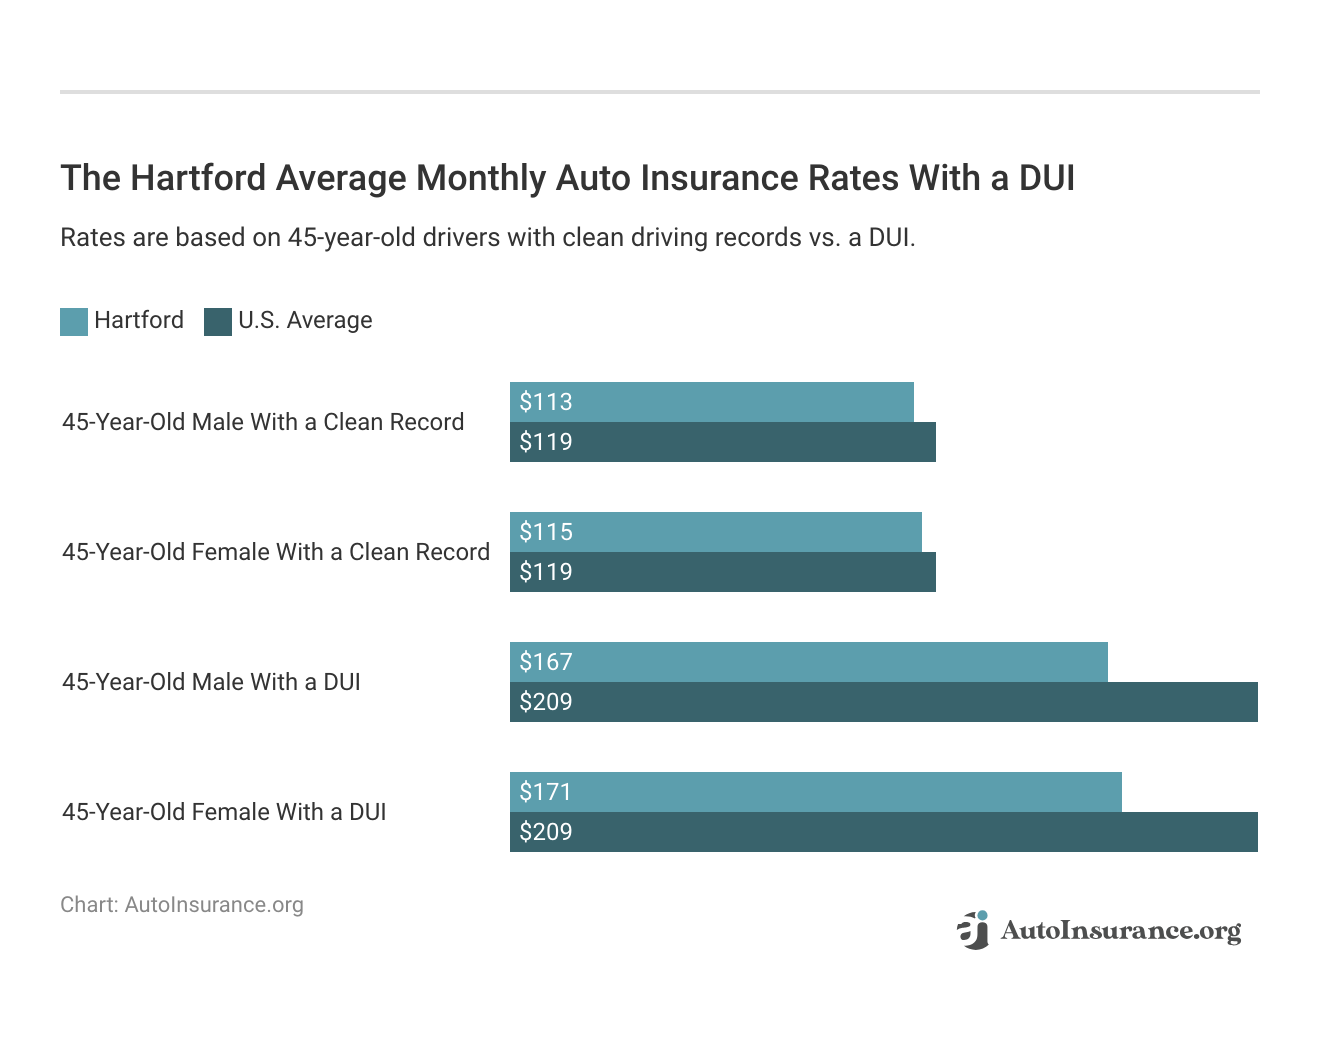 <h3>The Hartford Average Monthly Auto Insurance Rates With a DUI</h3>